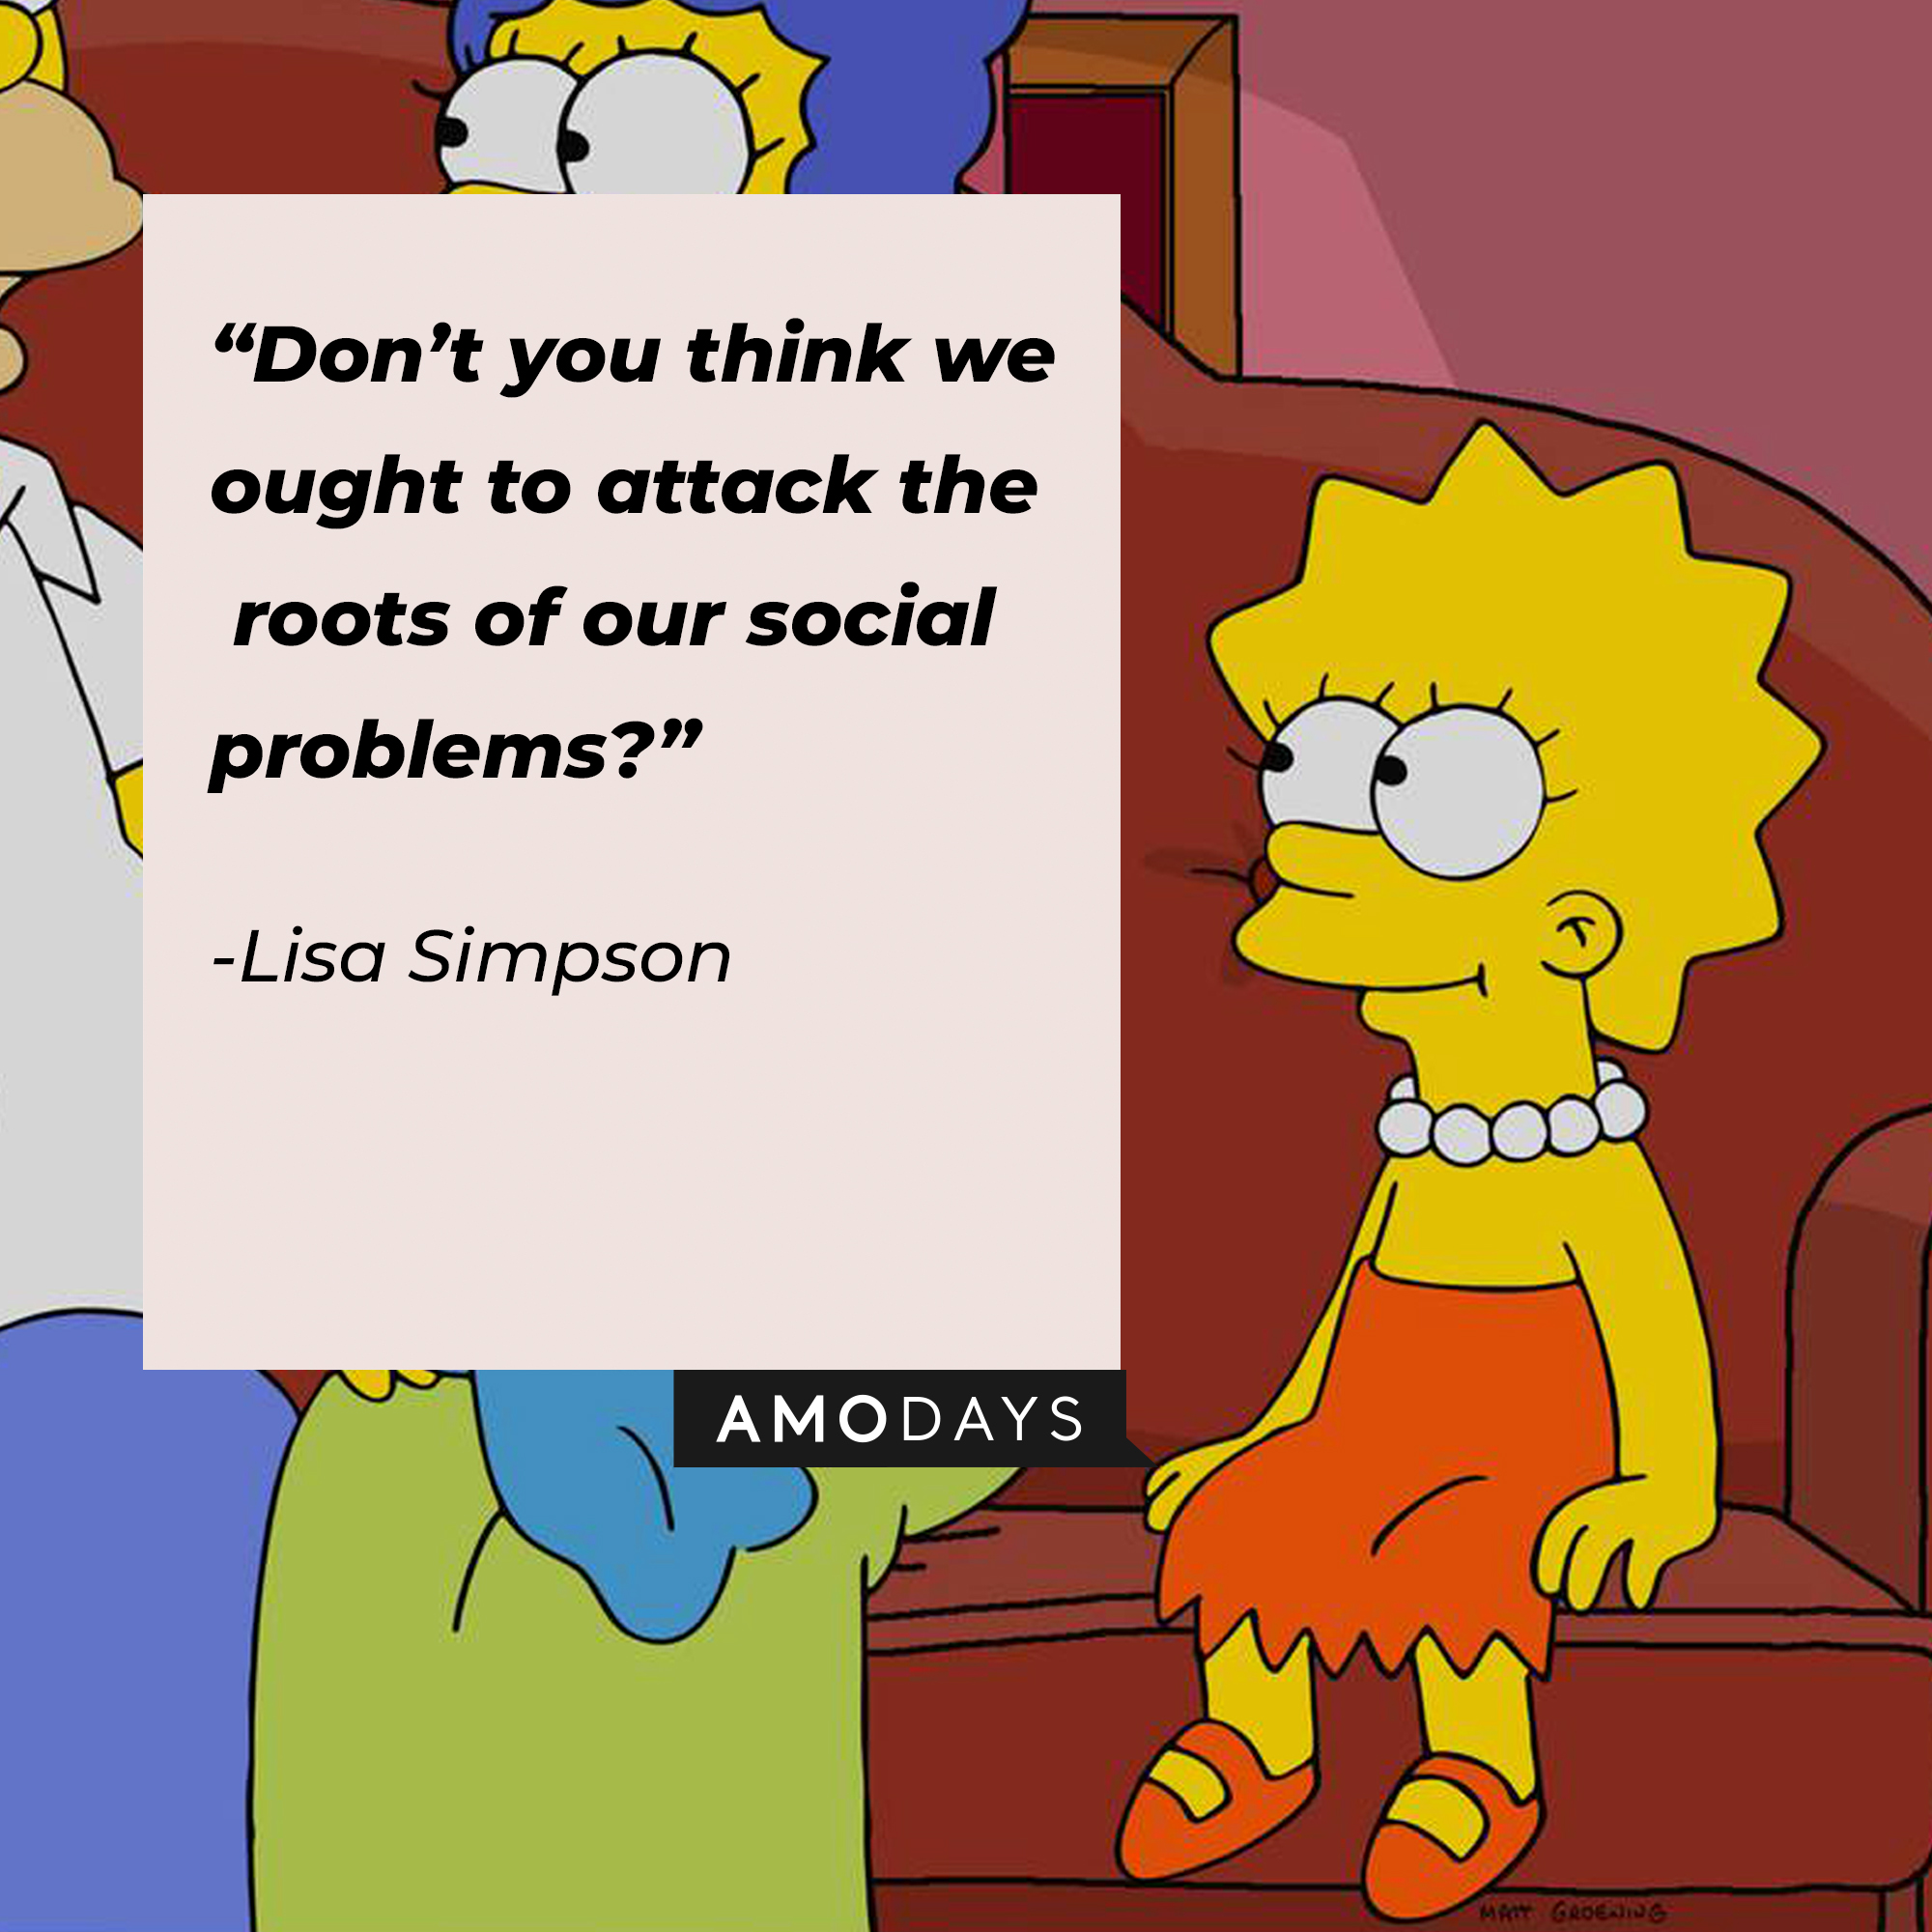 Lisa Simpson, with her quote: “Don’t you think we ought to attack the roots of our social problems?” | Source: facebook.com/TheSimpsons